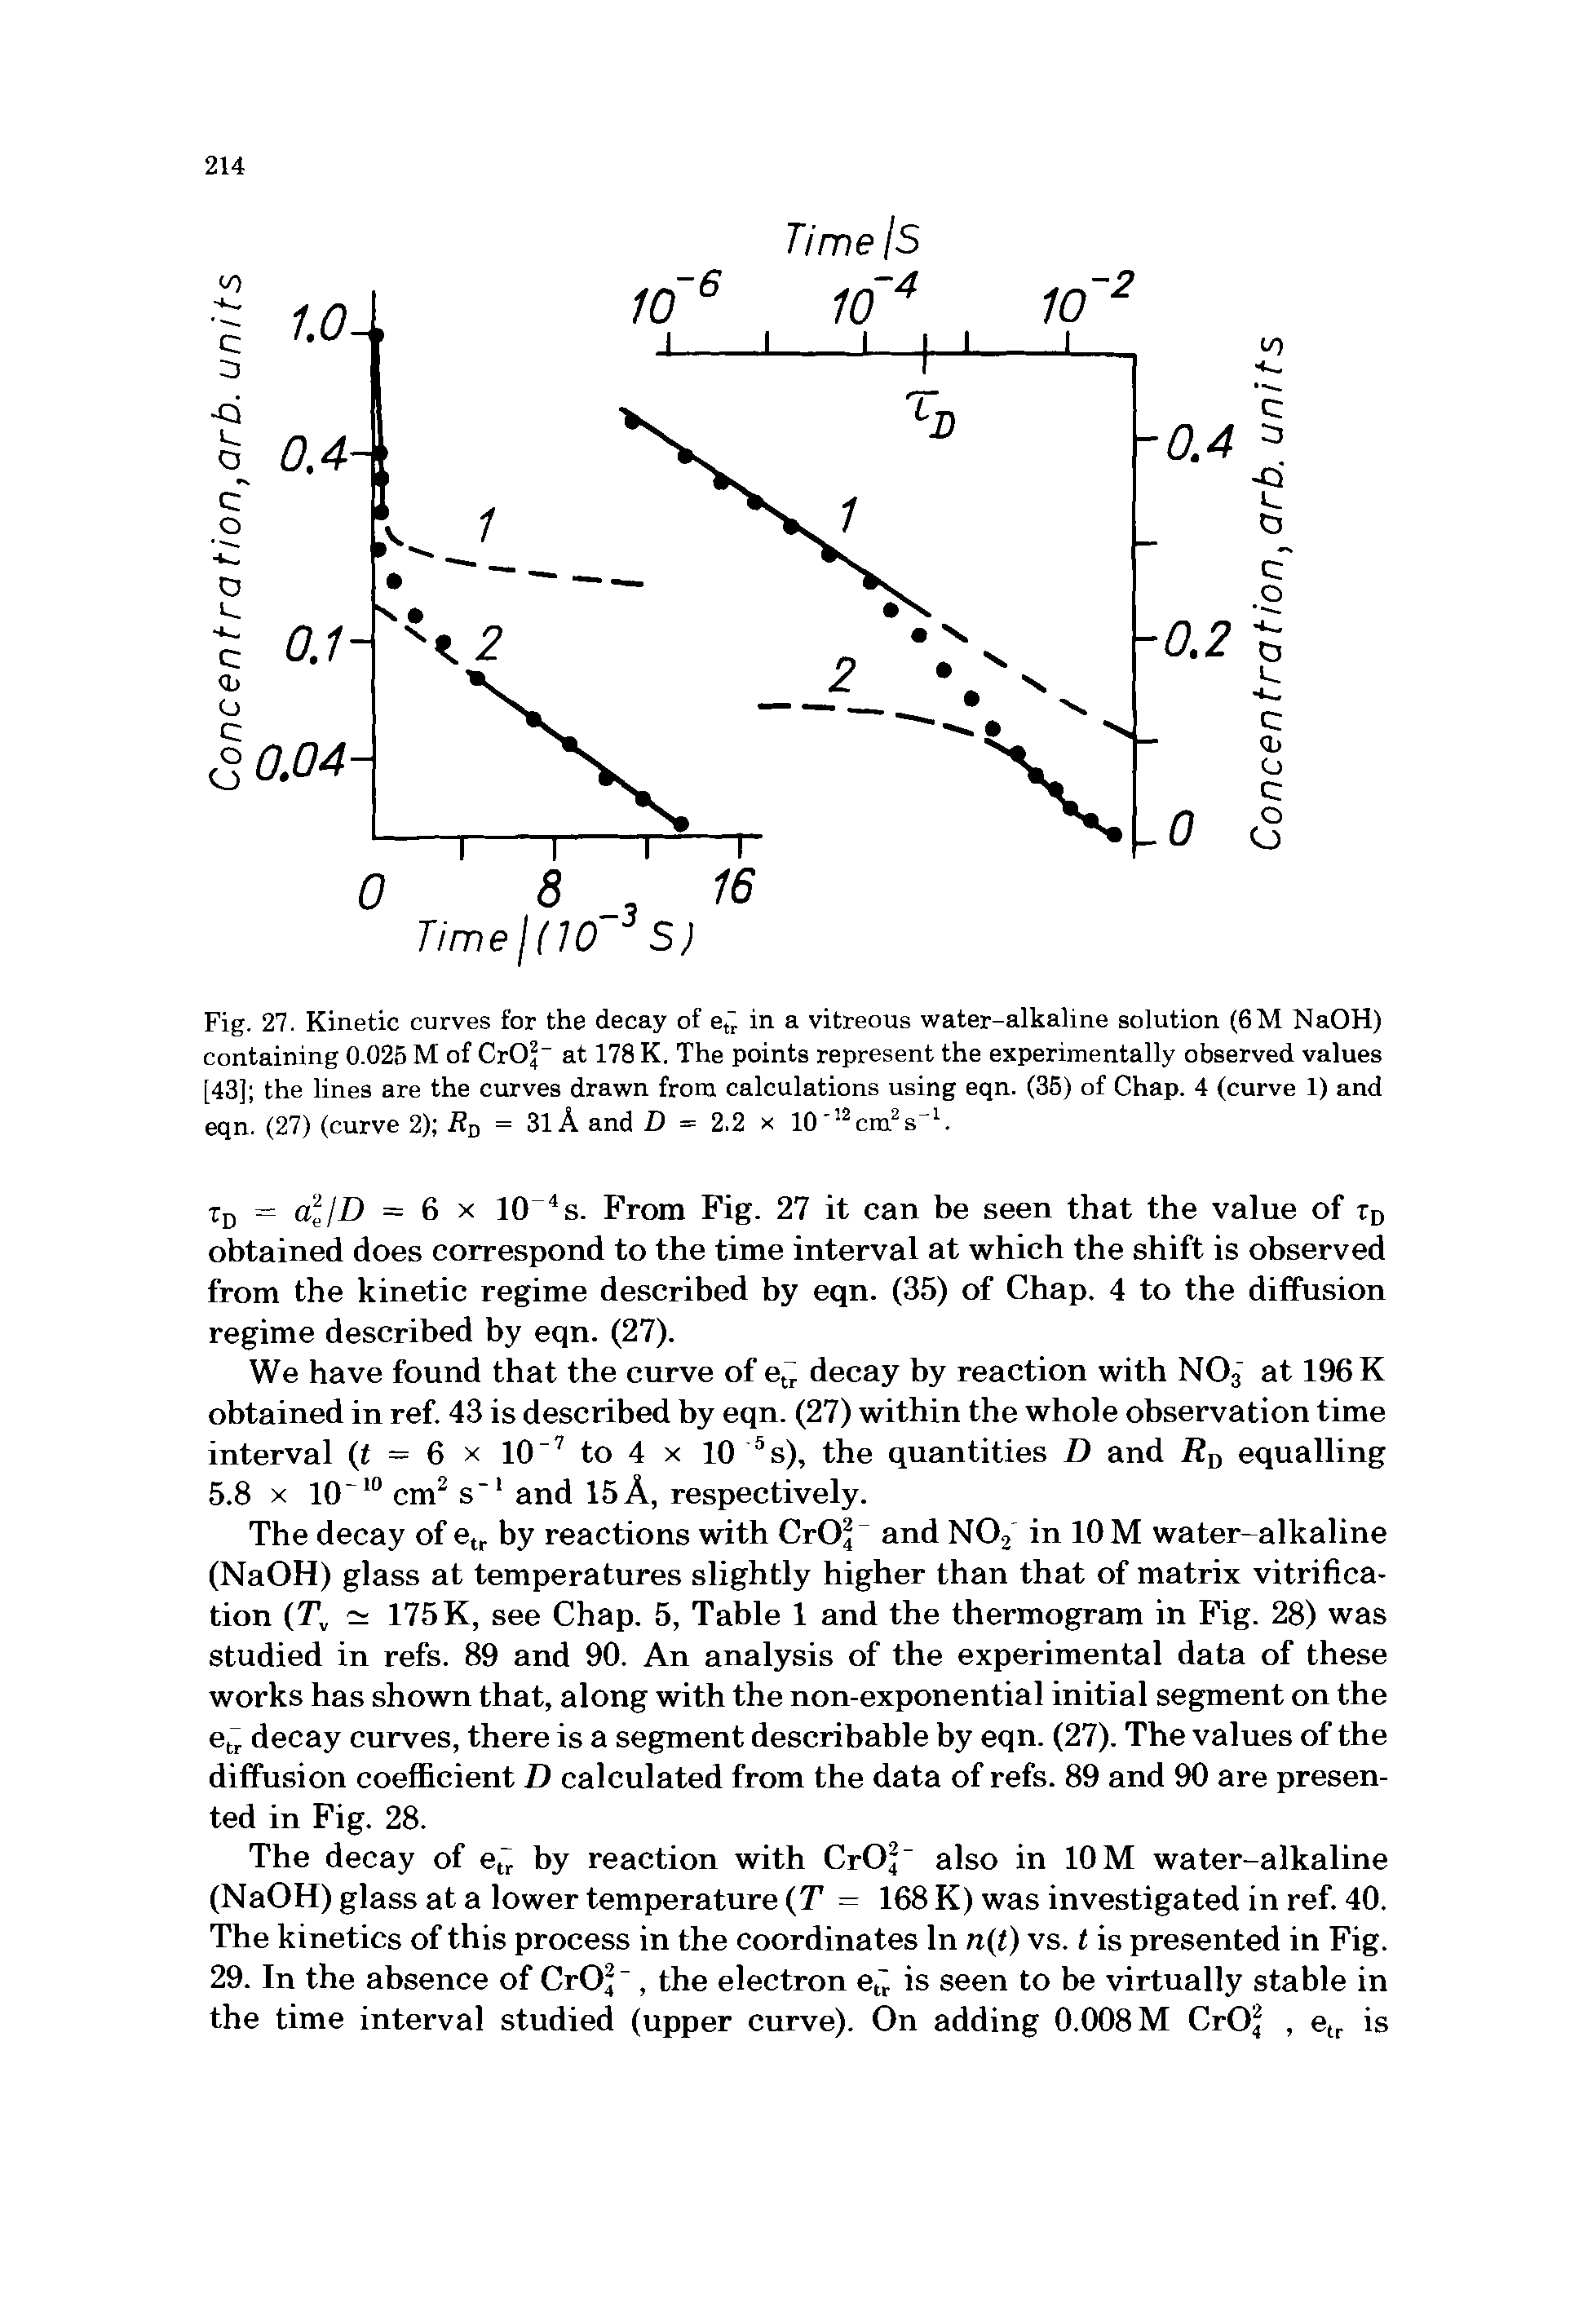 Fig. 27. Kinetic curves for the decay of et, in a vitreous water-alkaline solution (6M NaOH) containing 0.025 M of CrO2- at 178 K. The points represent the experimentally observed values [43] the lines are the curves drawn from calculations using eqn. (35) of Chap. 4 (curve 1) and eqn. (27) (curve 2) i D = 3lA and D = 2.2 x 10 12cm2s-1.